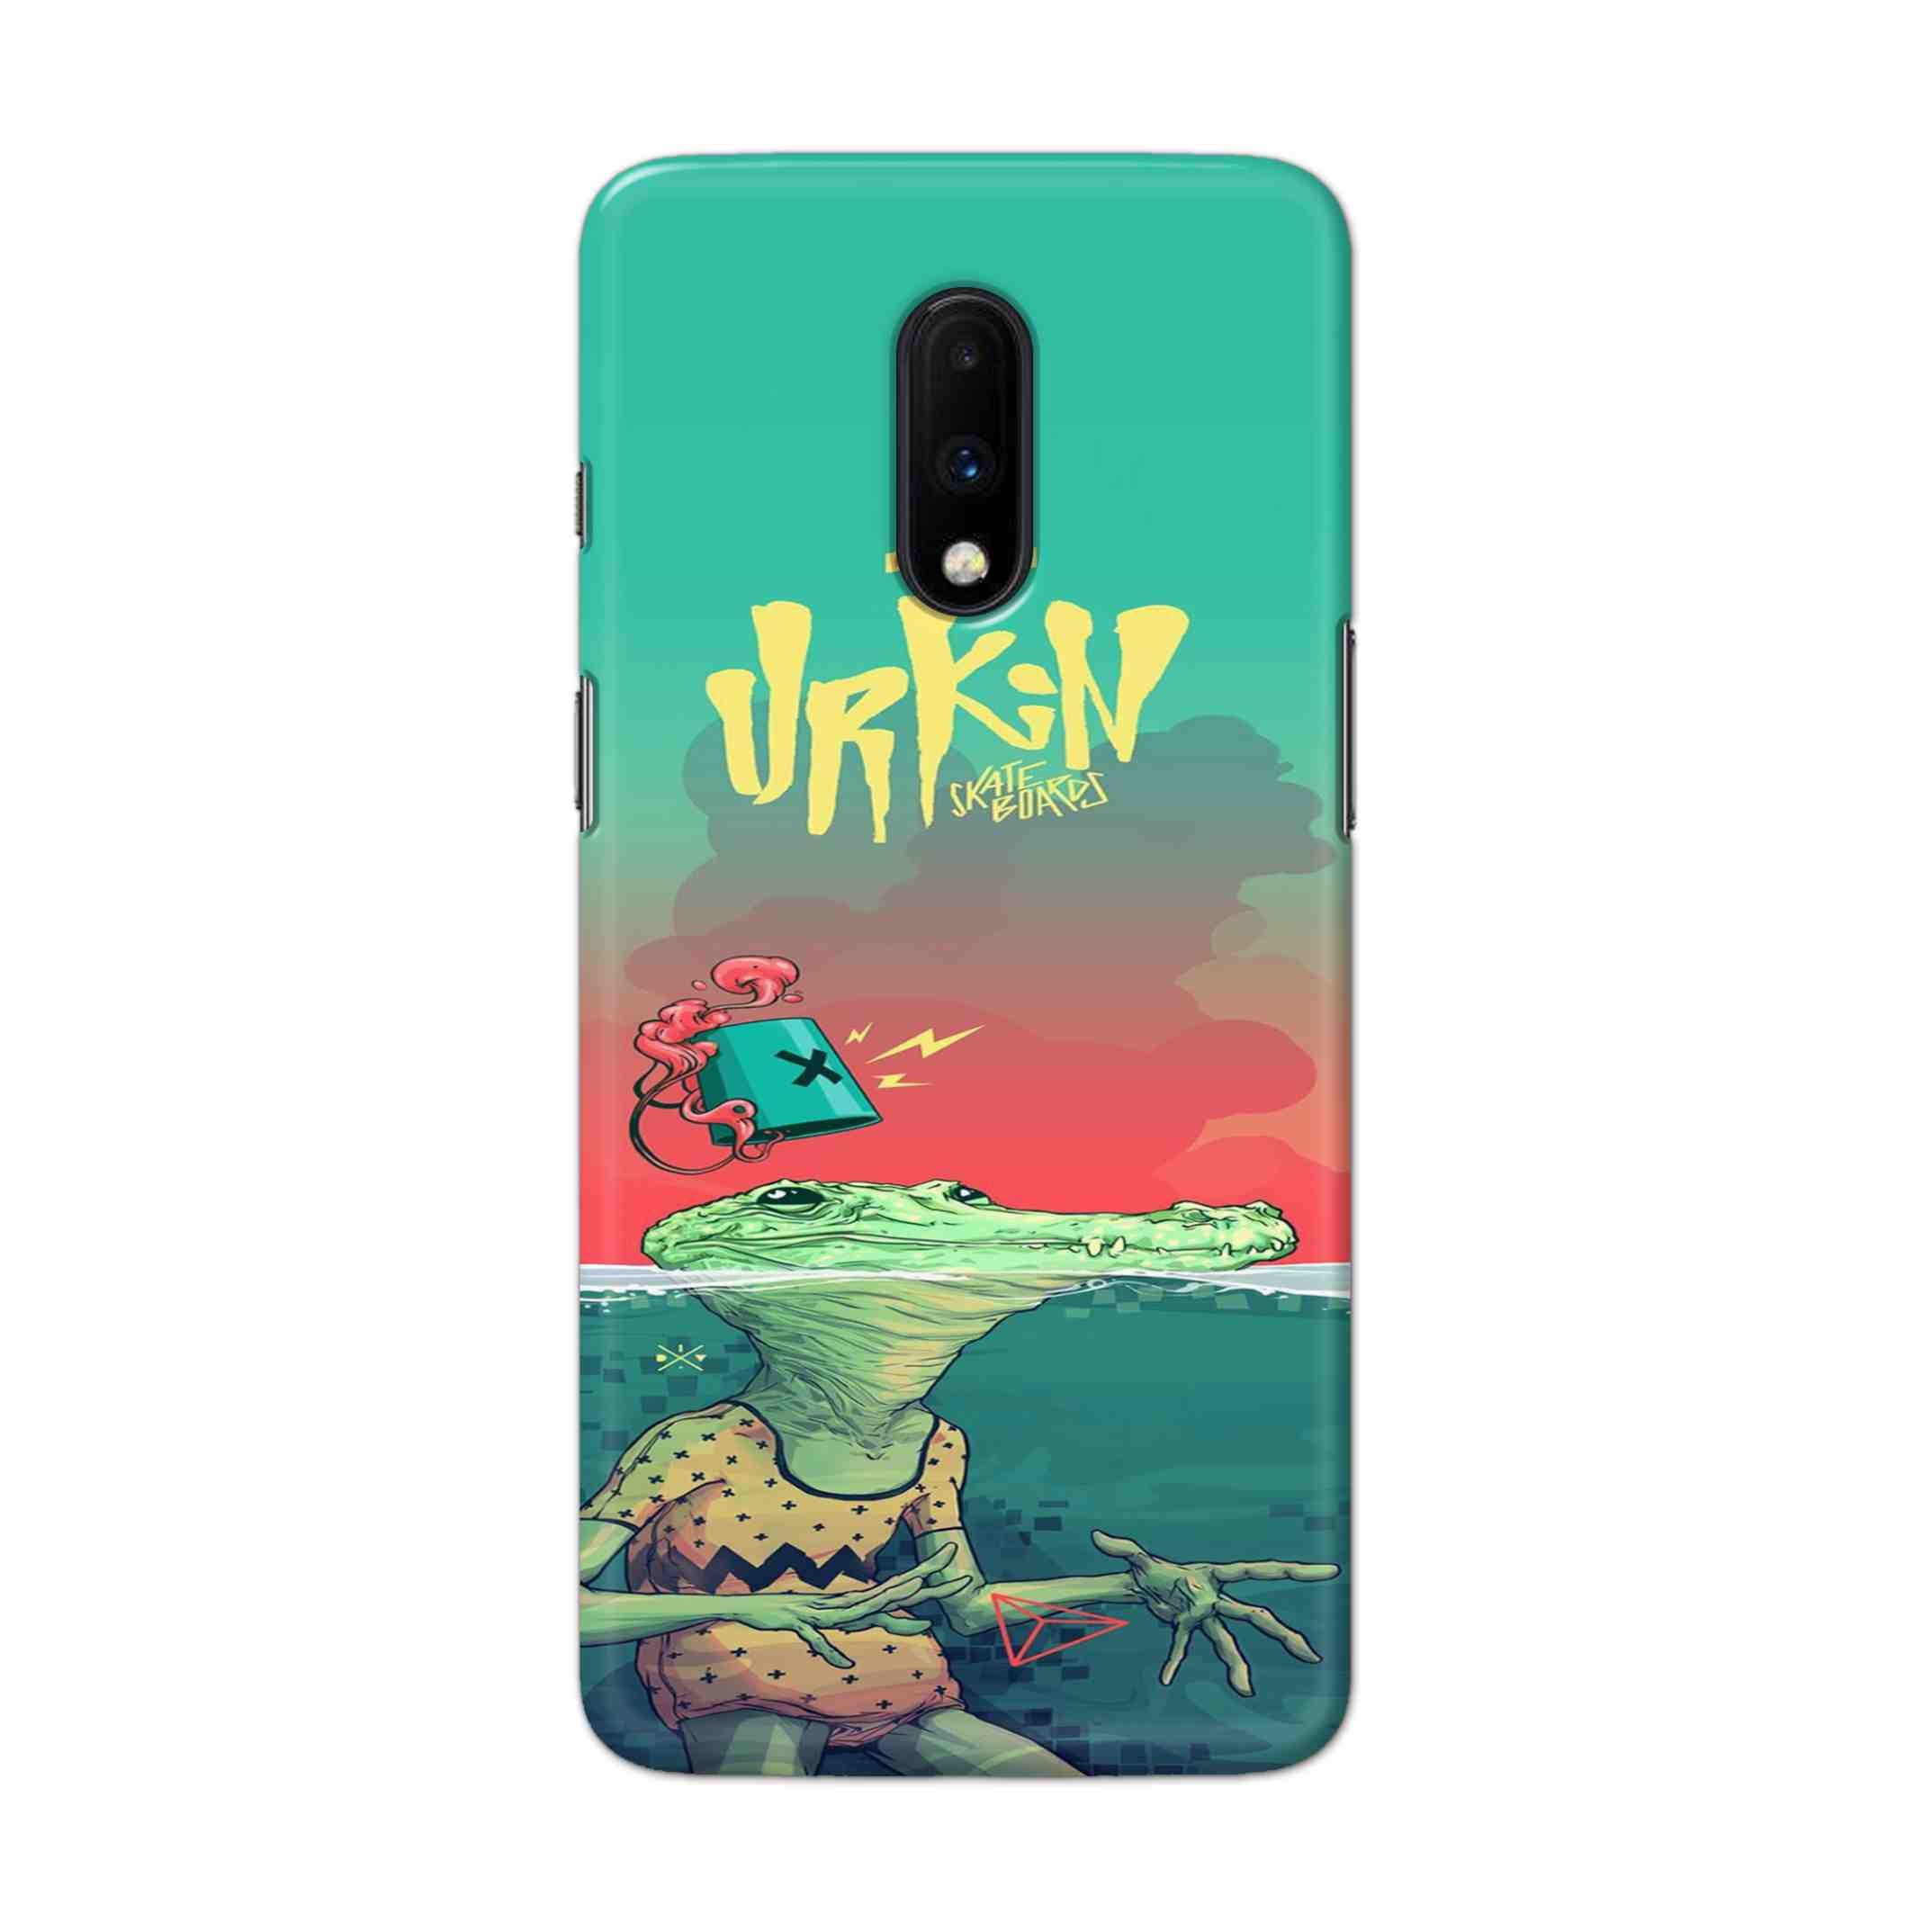 Buy Urkin Hard Back Mobile Phone Case Cover For OnePlus 7 Online